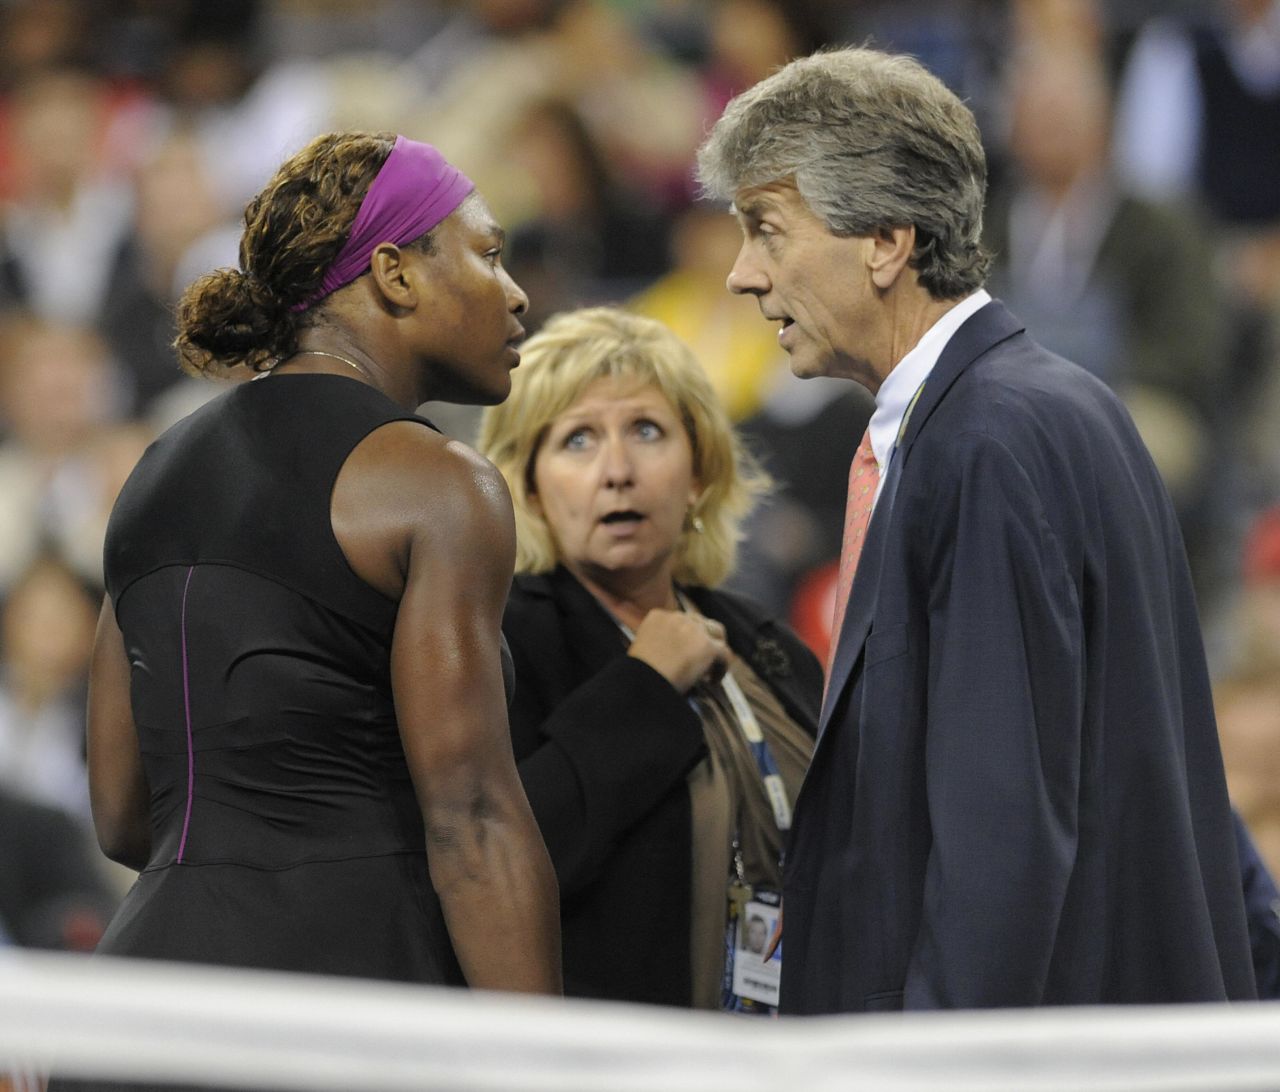 During her 2009 U.S. Open semifinal against Kim Clijsters, Serena Williams unleashed a verbal assault on an official which result in a hefty fine and a two-year suspended ban. Williams repeated the episode in last year's New York final, calling the umpire "ugly on the inside" during her defeat to Samantha Stosur.